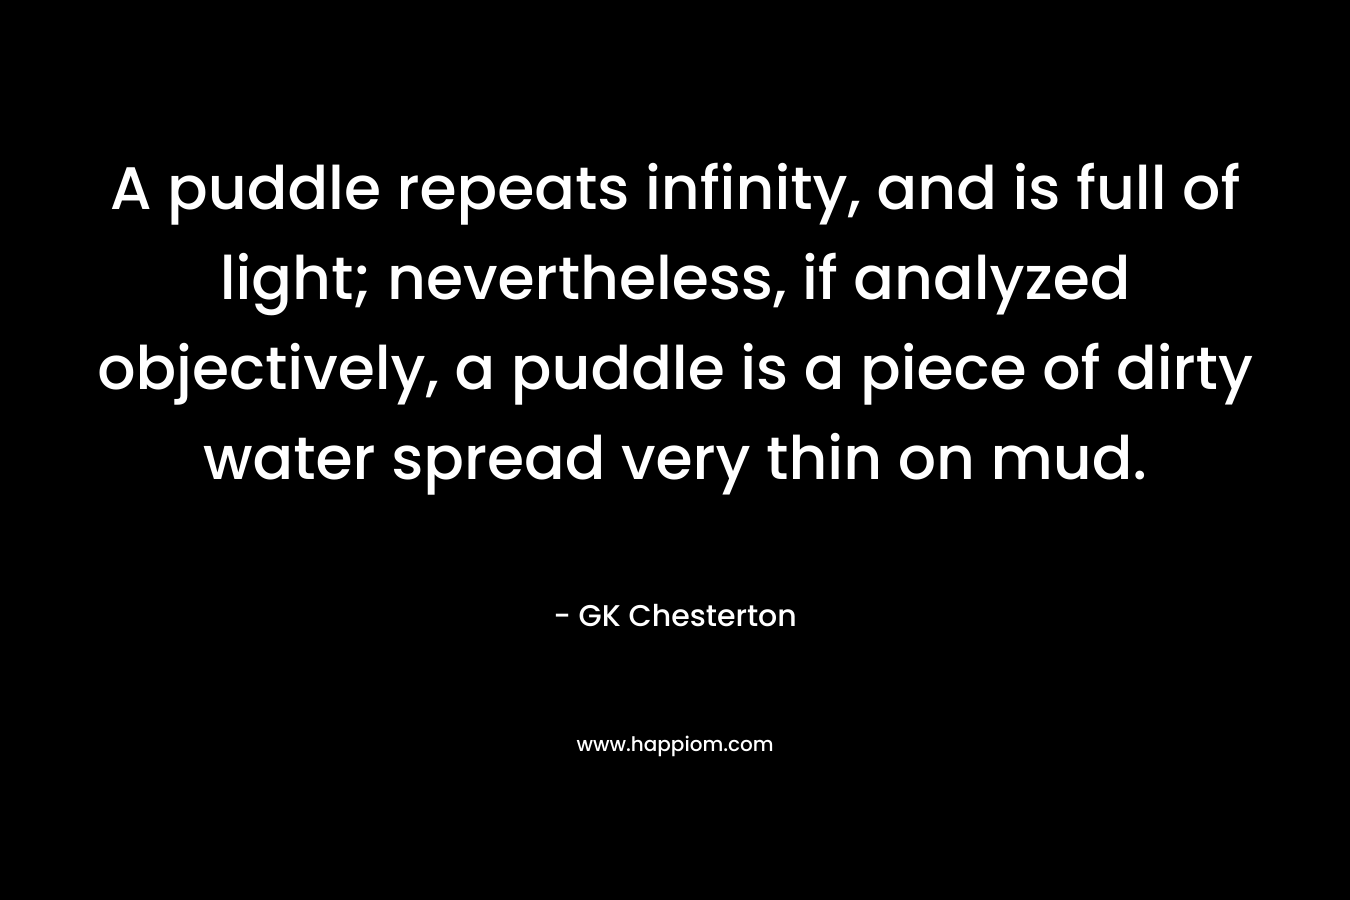 A puddle repeats infinity, and is full of light; nevertheless, if analyzed objectively, a puddle is a piece of dirty water spread very thin on mud. – GK Chesterton